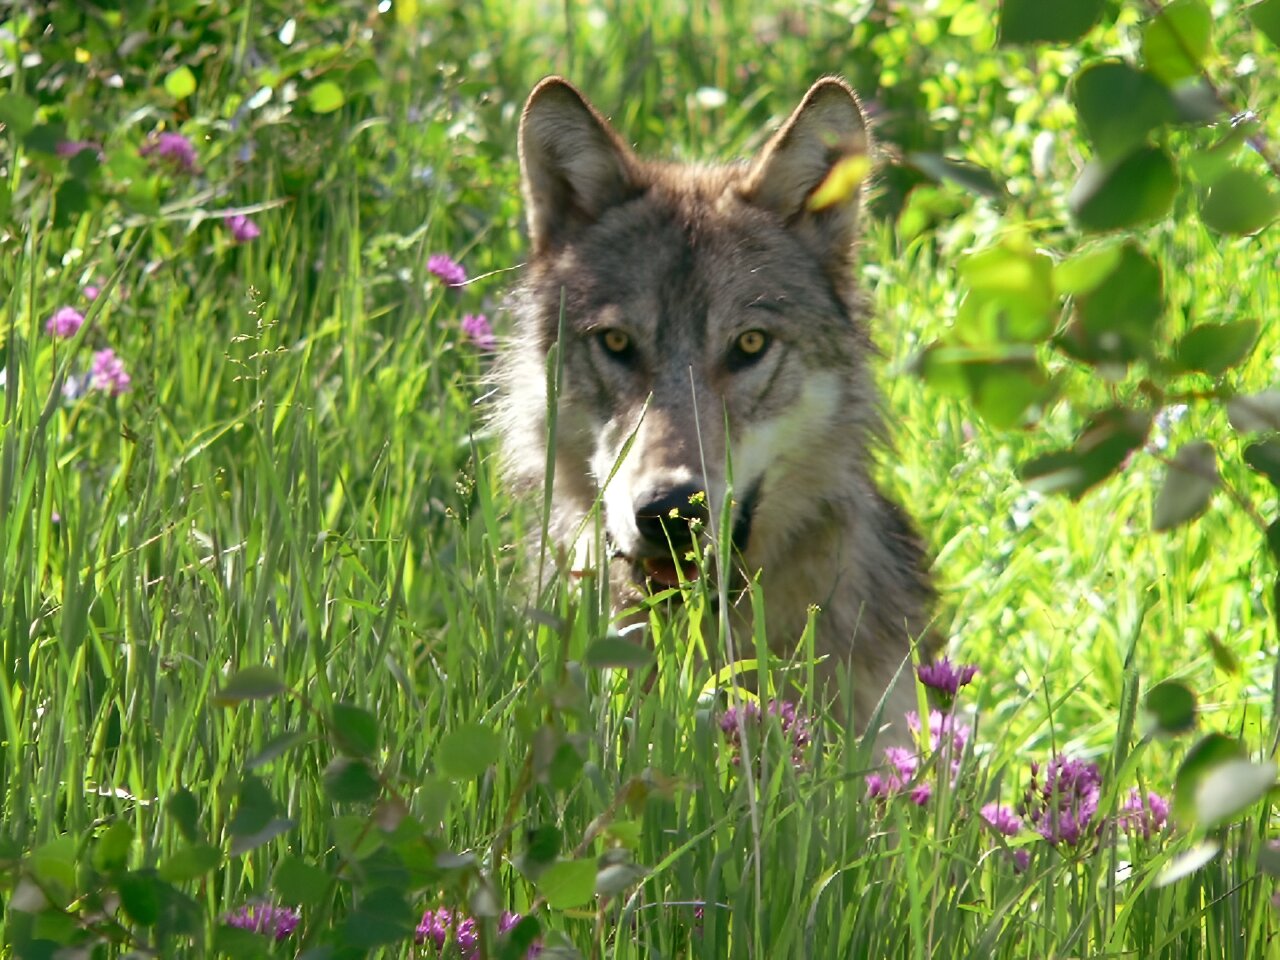 Wolf myth-busting with wildlife biologist Kevin Crooks